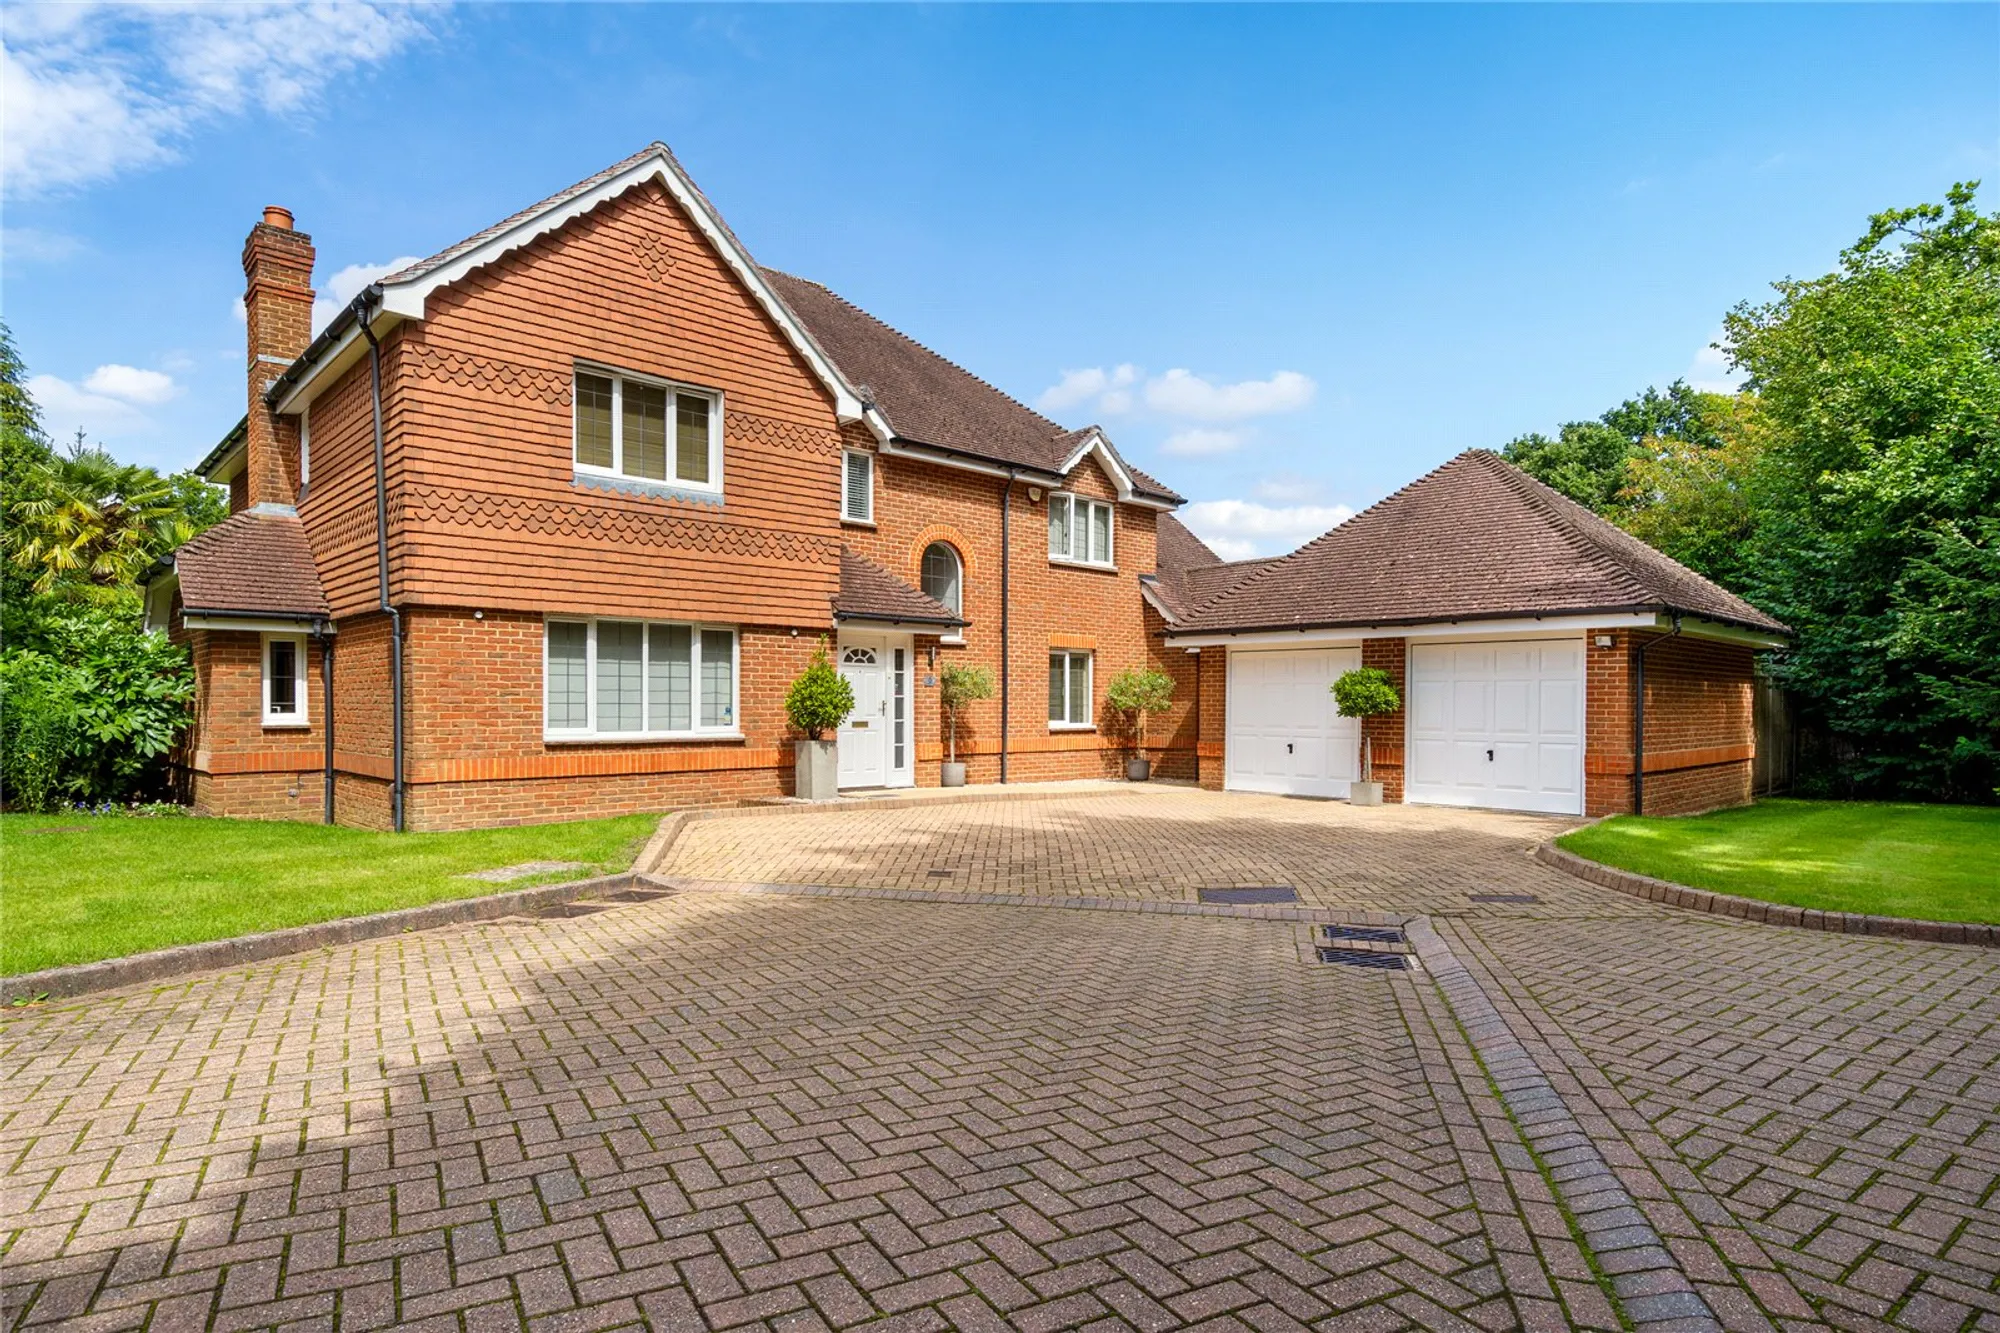 5 bed detached house for sale in Densham Drive, Purley - Property Image 1